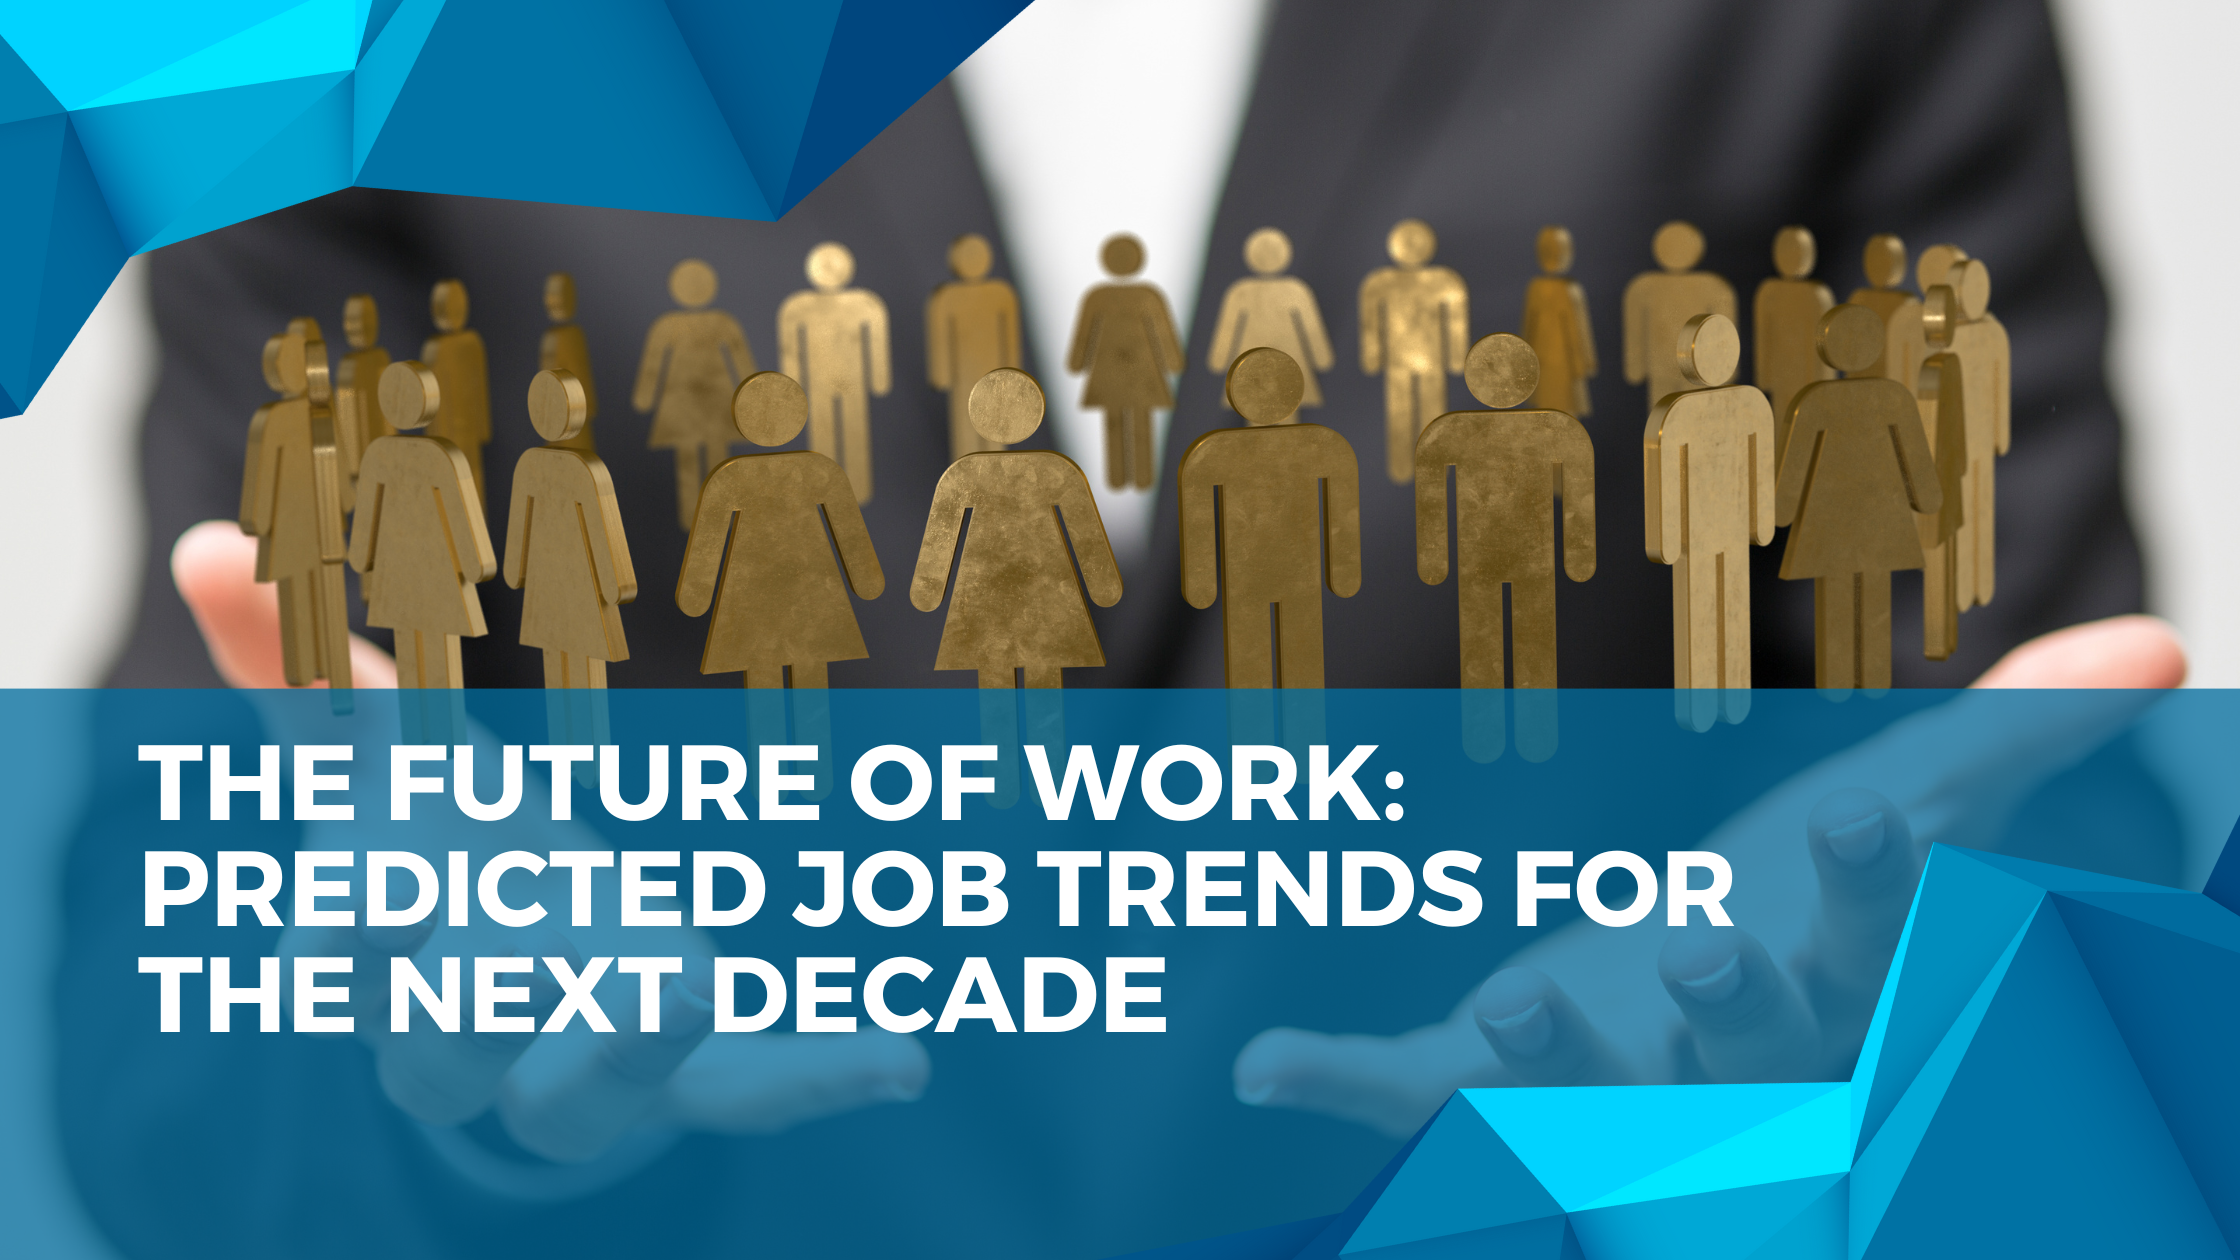 The Future of Work: Predicted Job Trends for the Next Decade